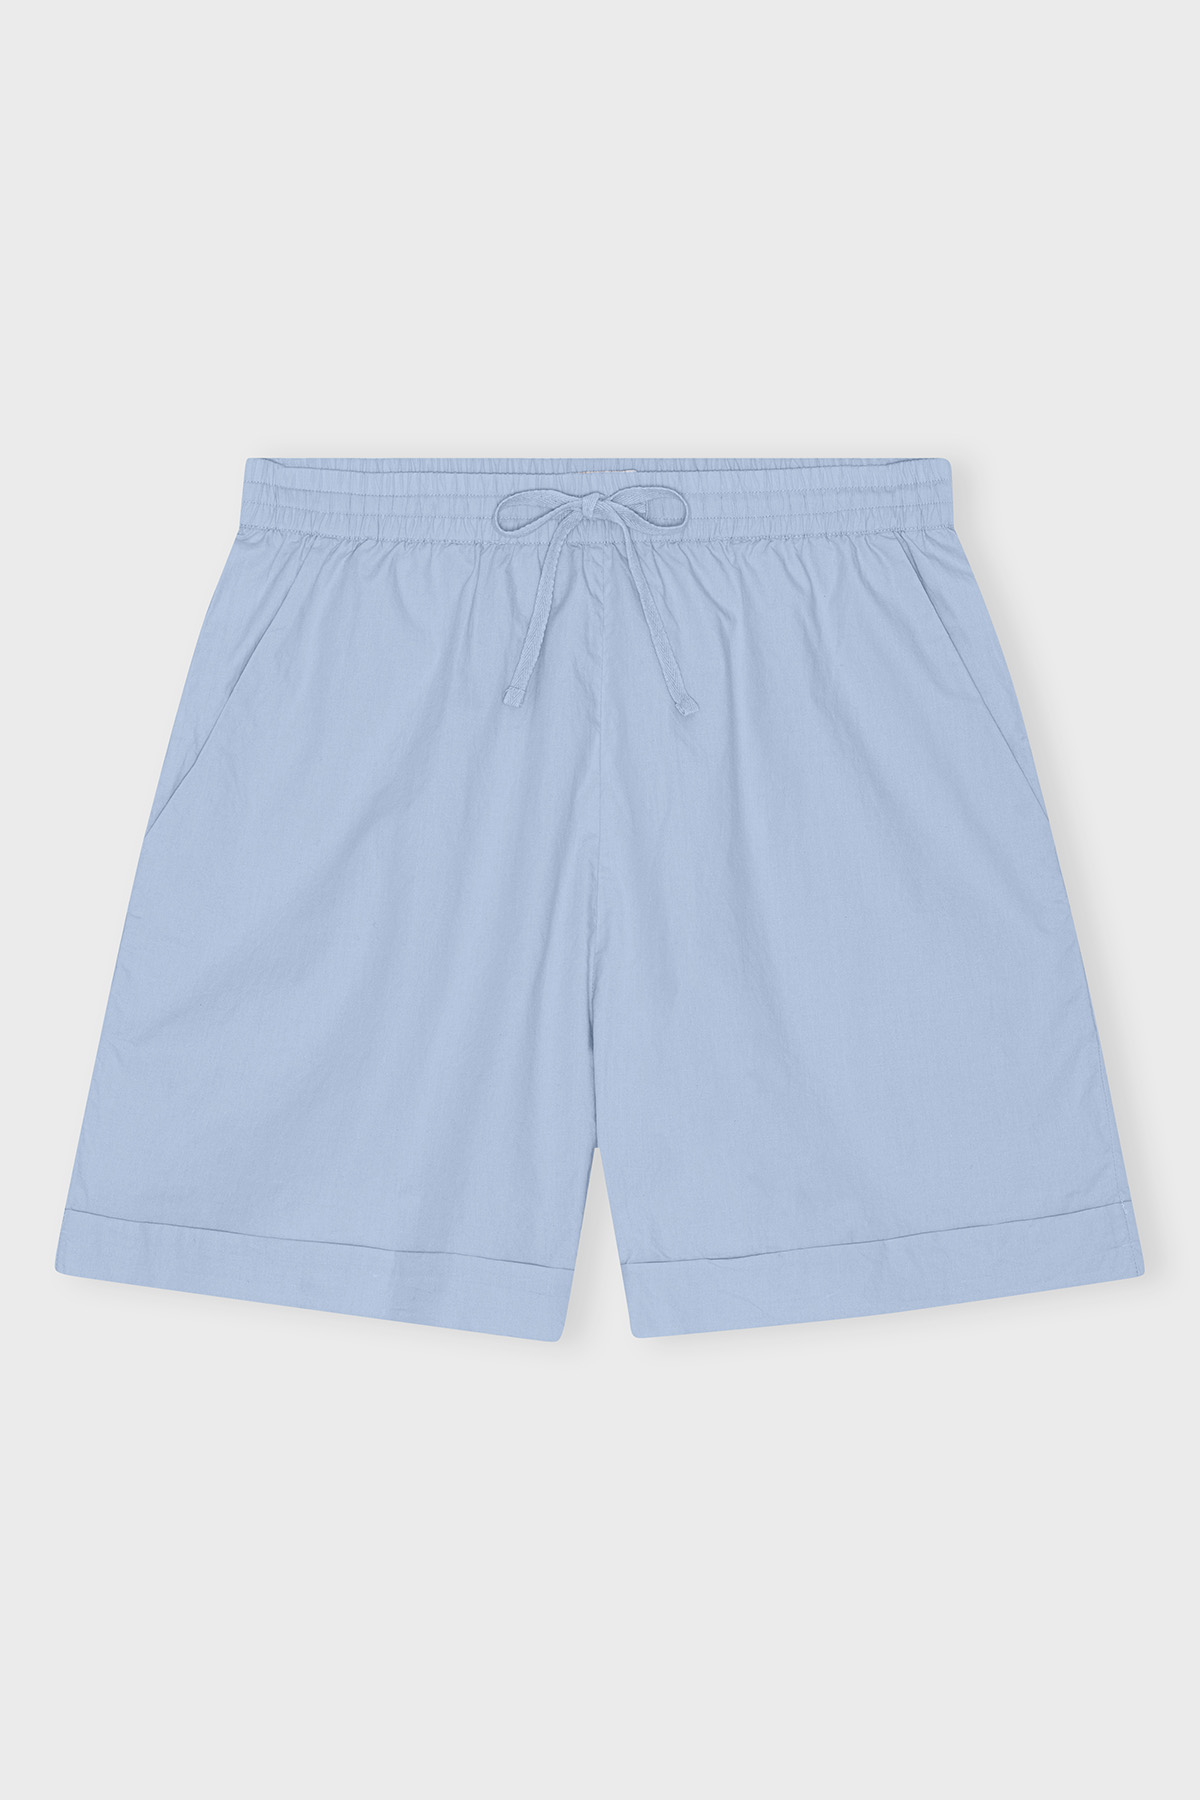 Shorts “Laura” fra Care By Me – Summer Blue